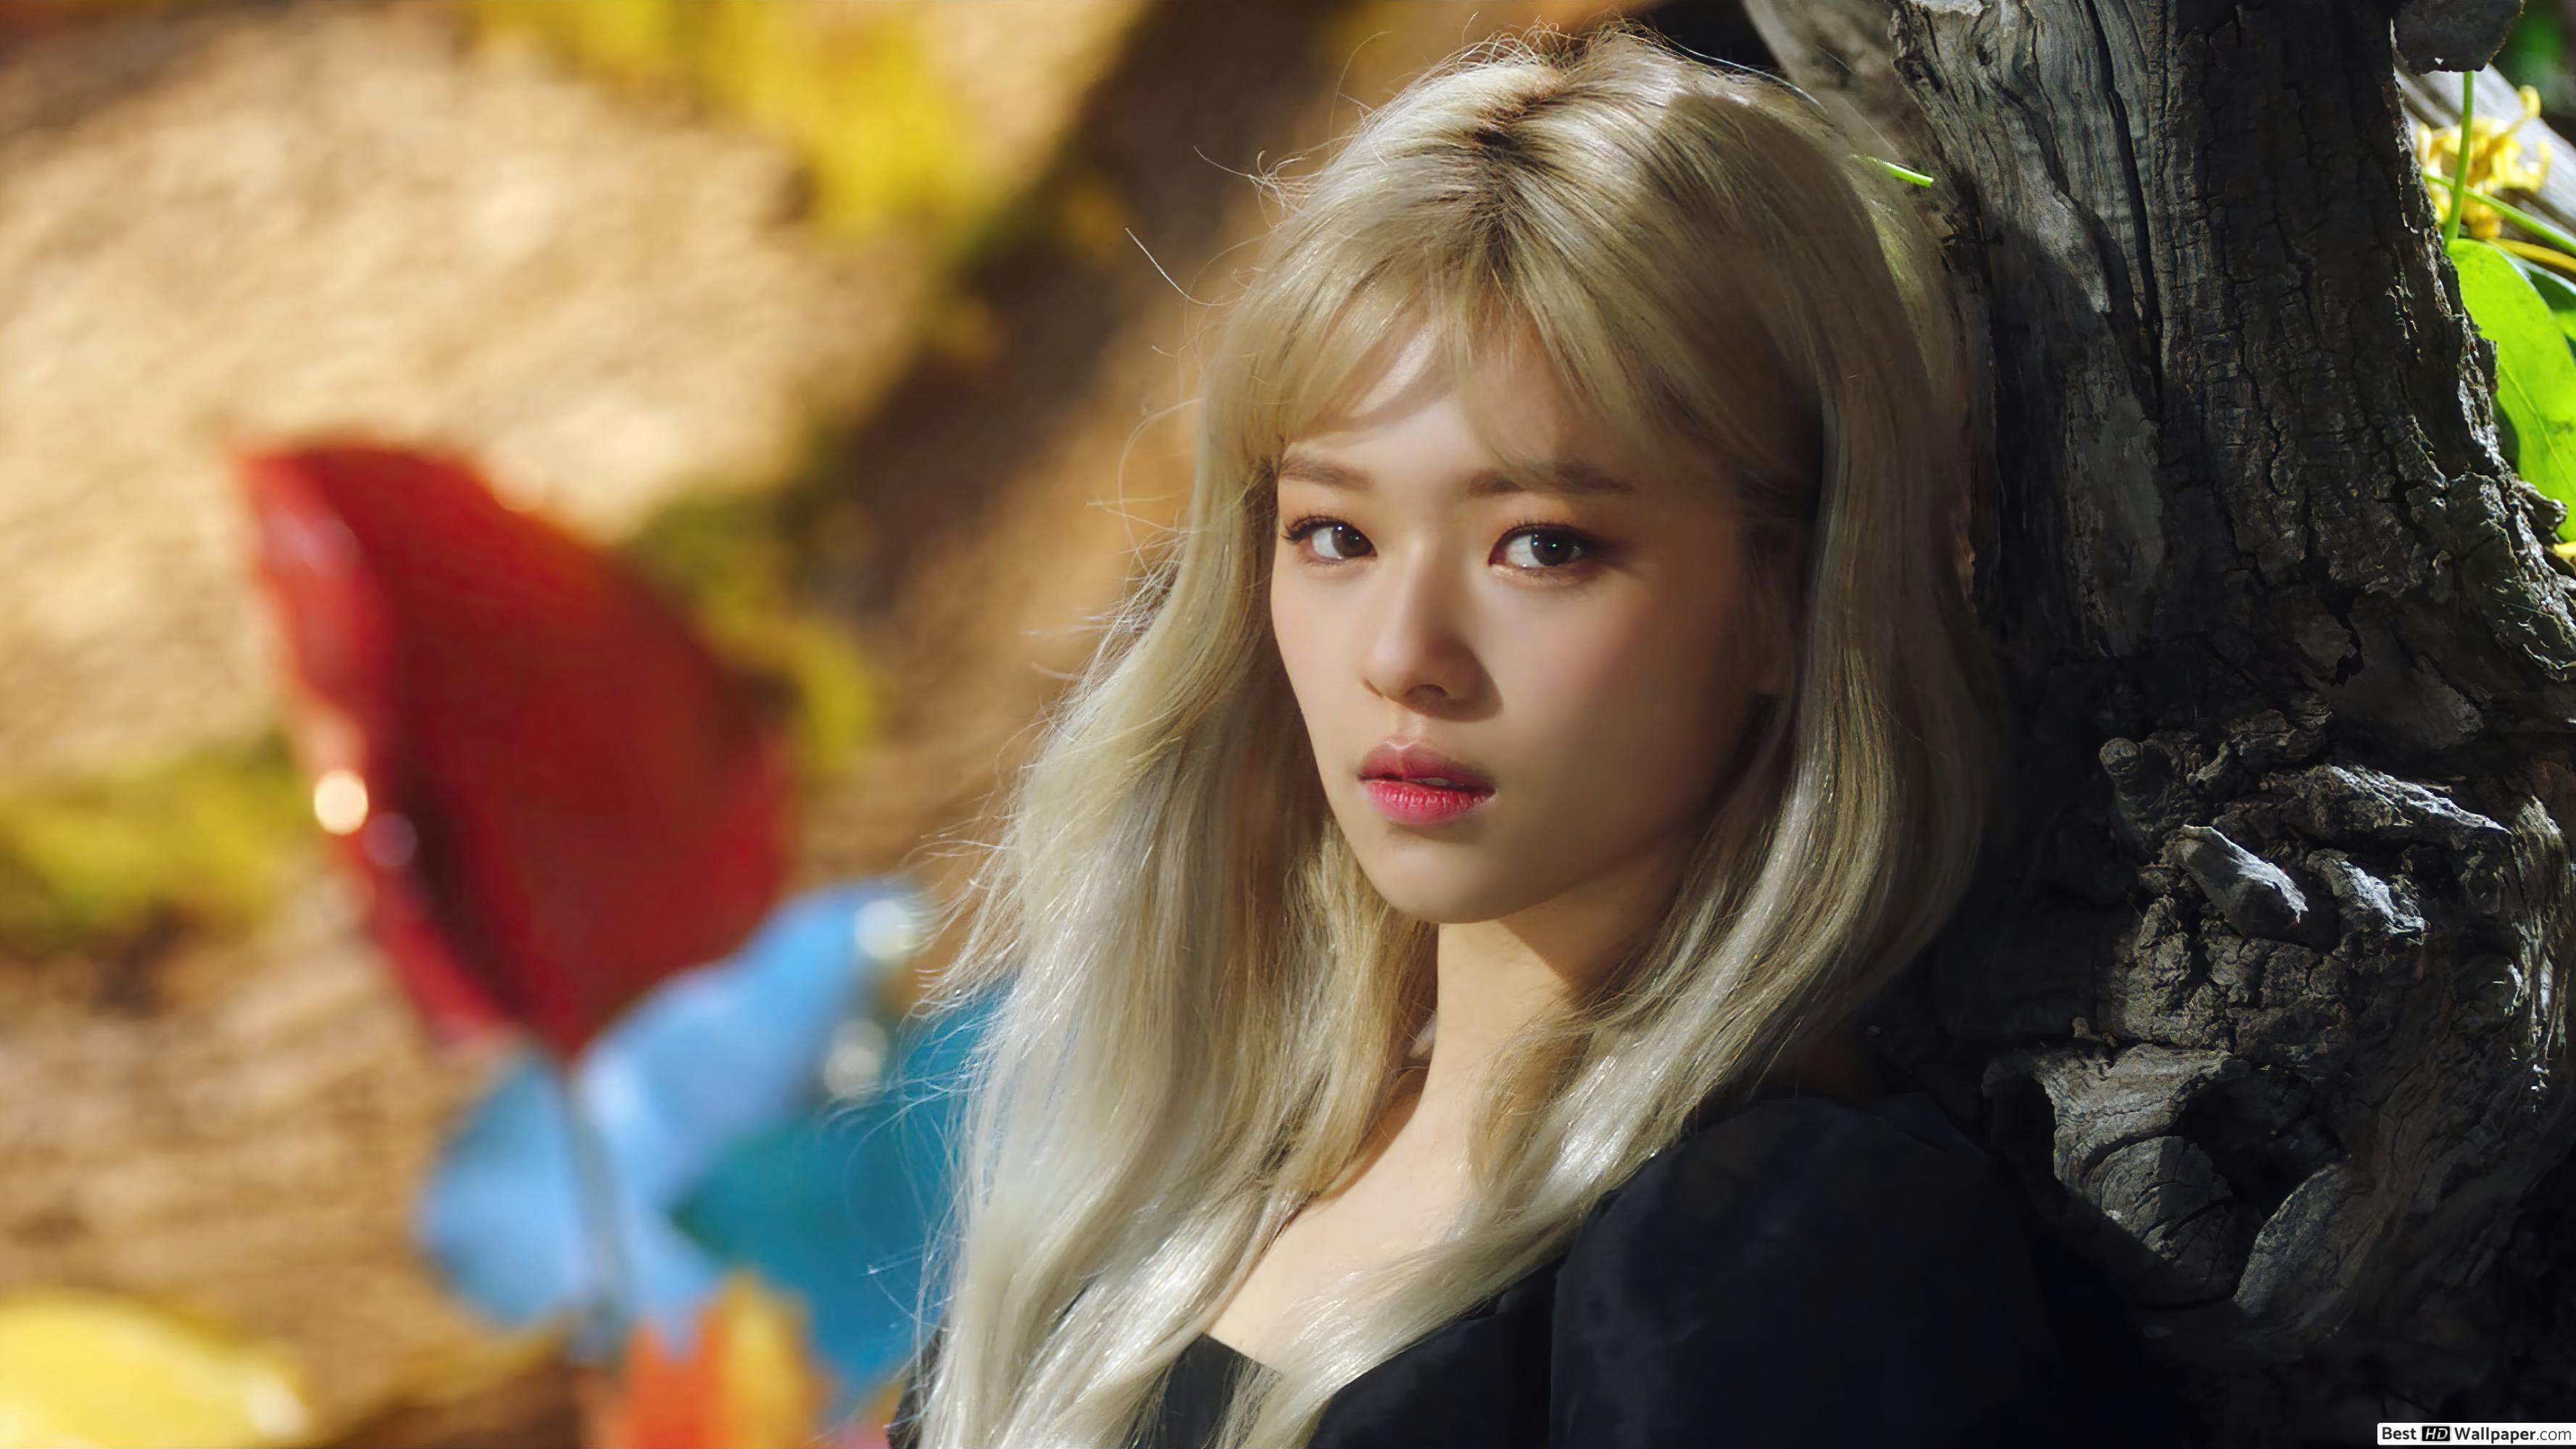 Jeongyeon In 'More & More' MV (2020) From Twice (K Pop Band) HD Wallpaper Download